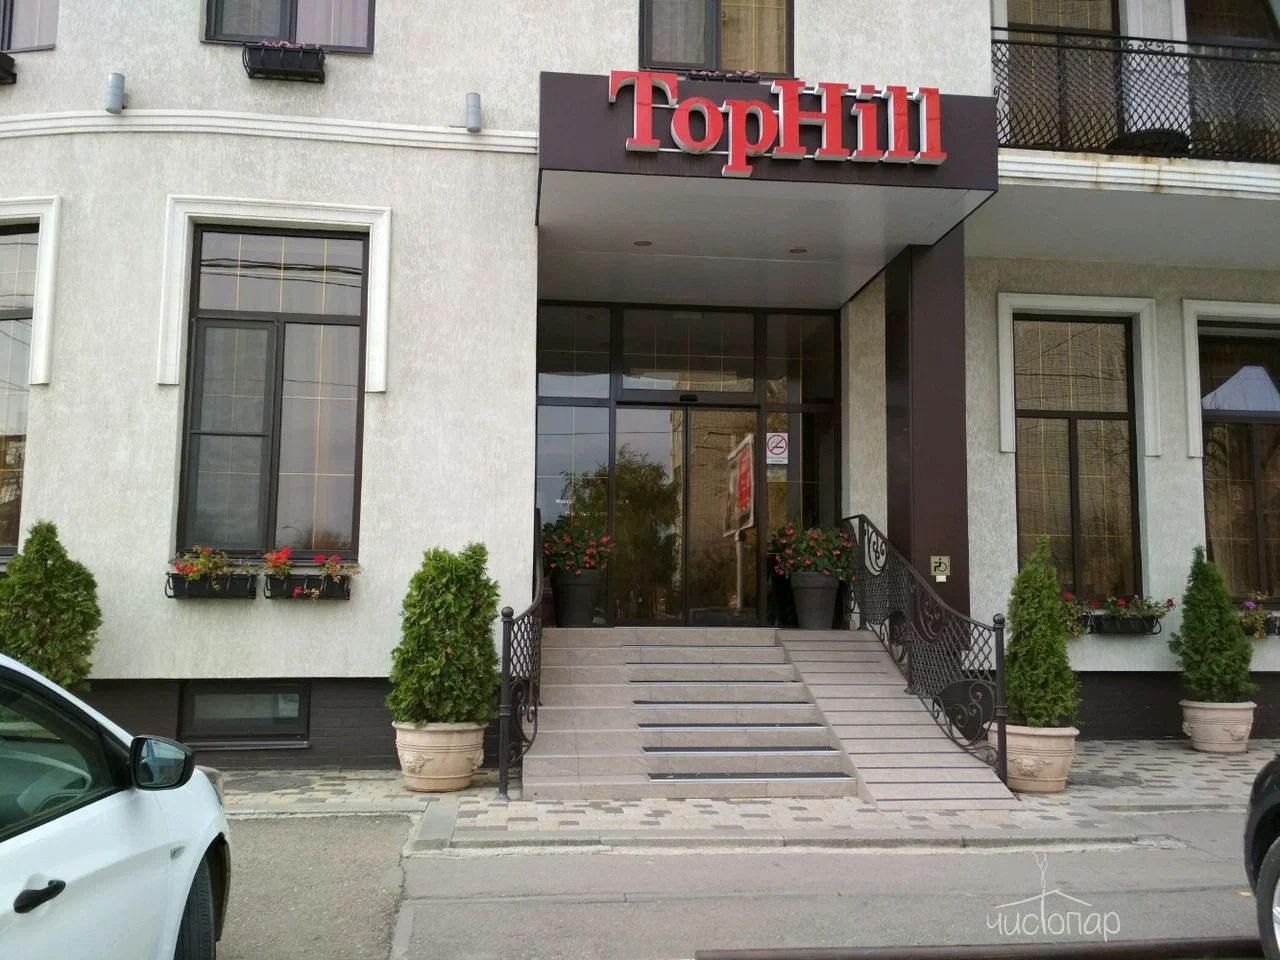 Top Hill Hotel: